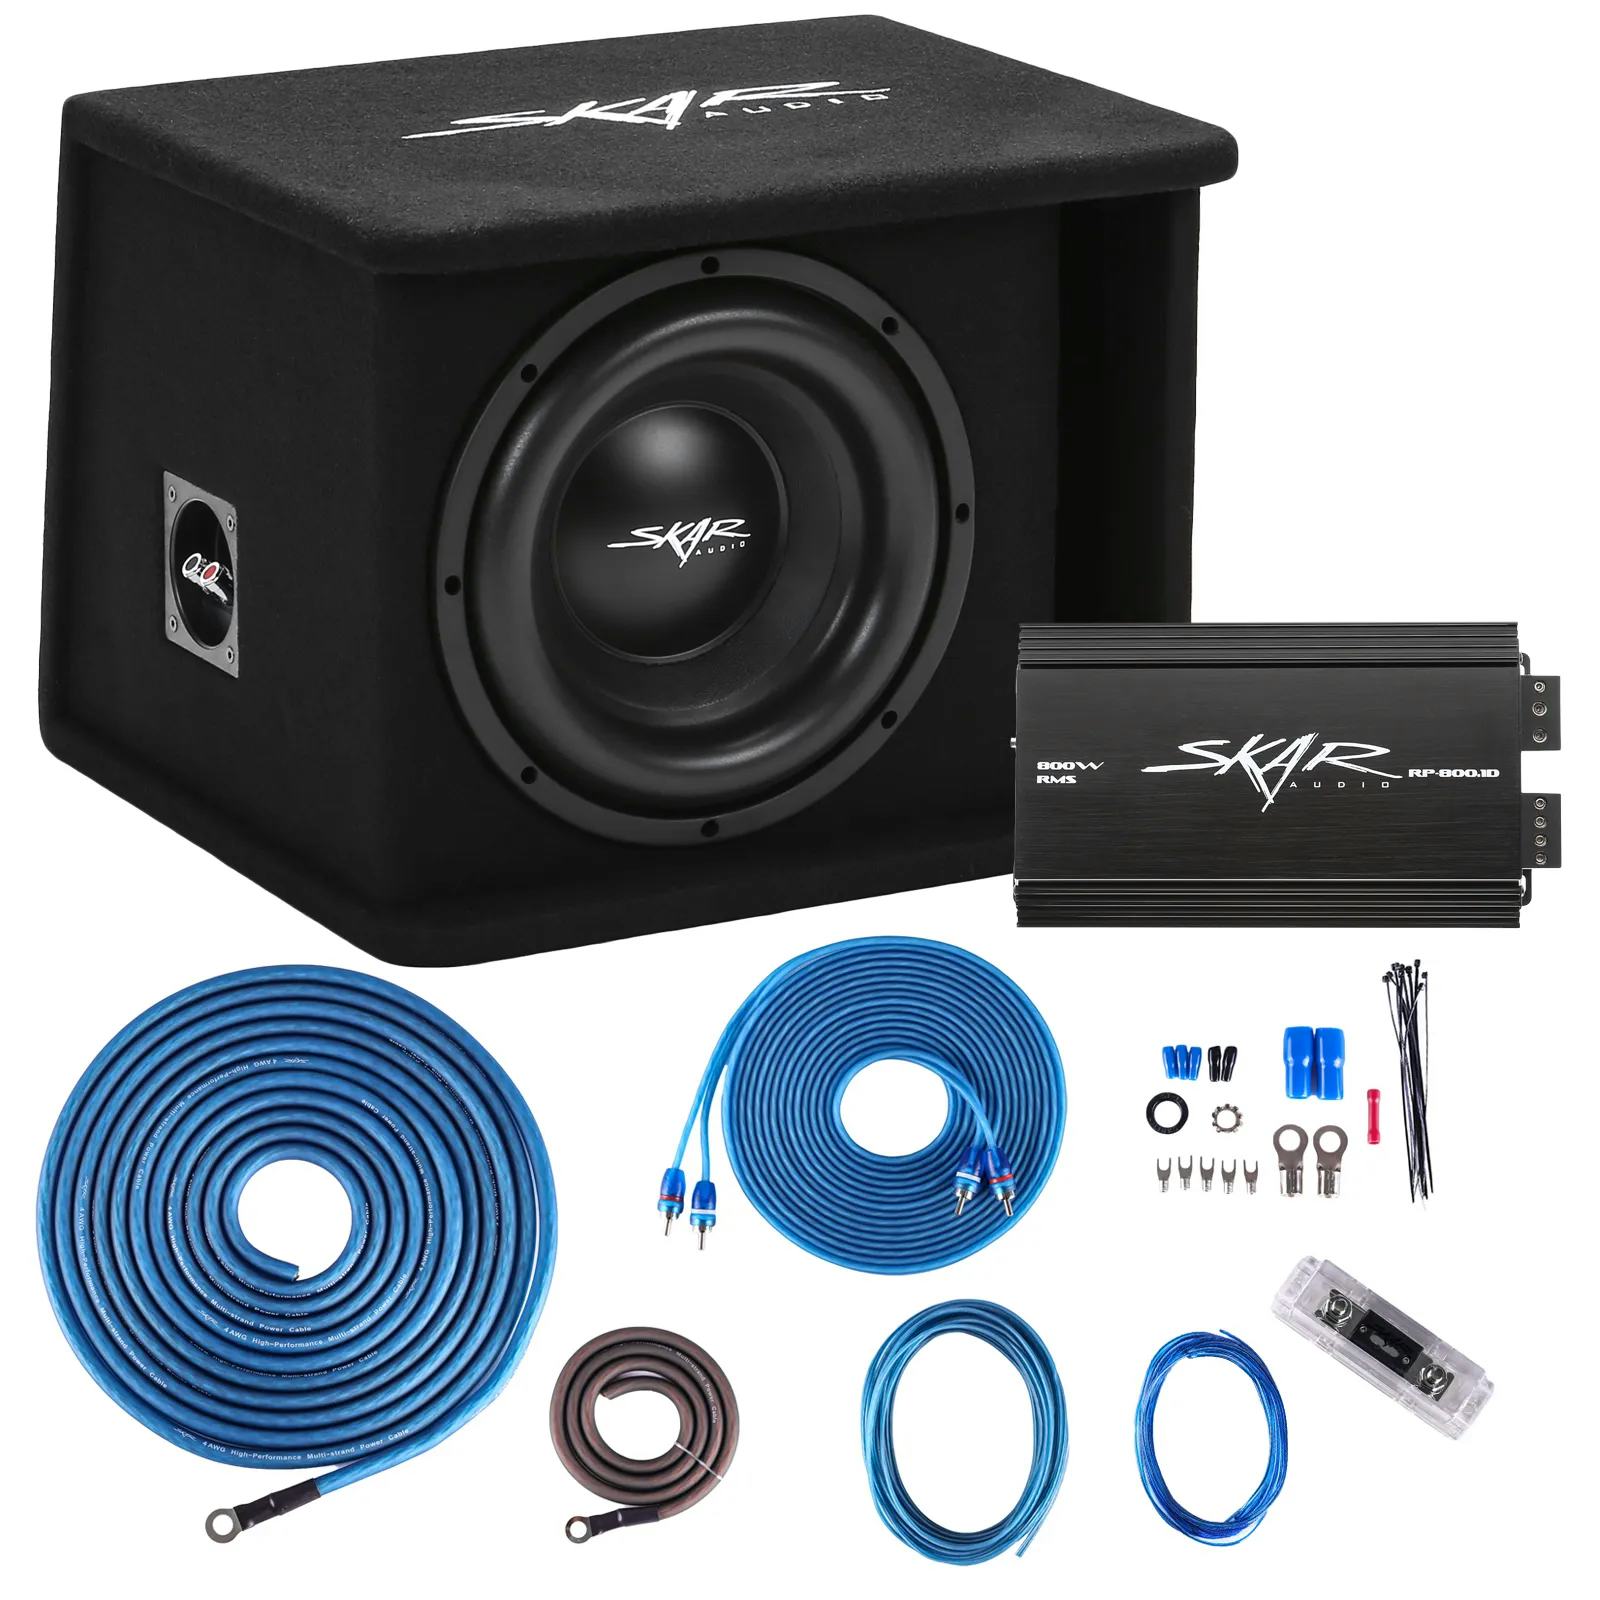 Single 10" 1,200 Watt SDR Series Complete Subwoofer Package with Vented Enclosure and Amplifier #1